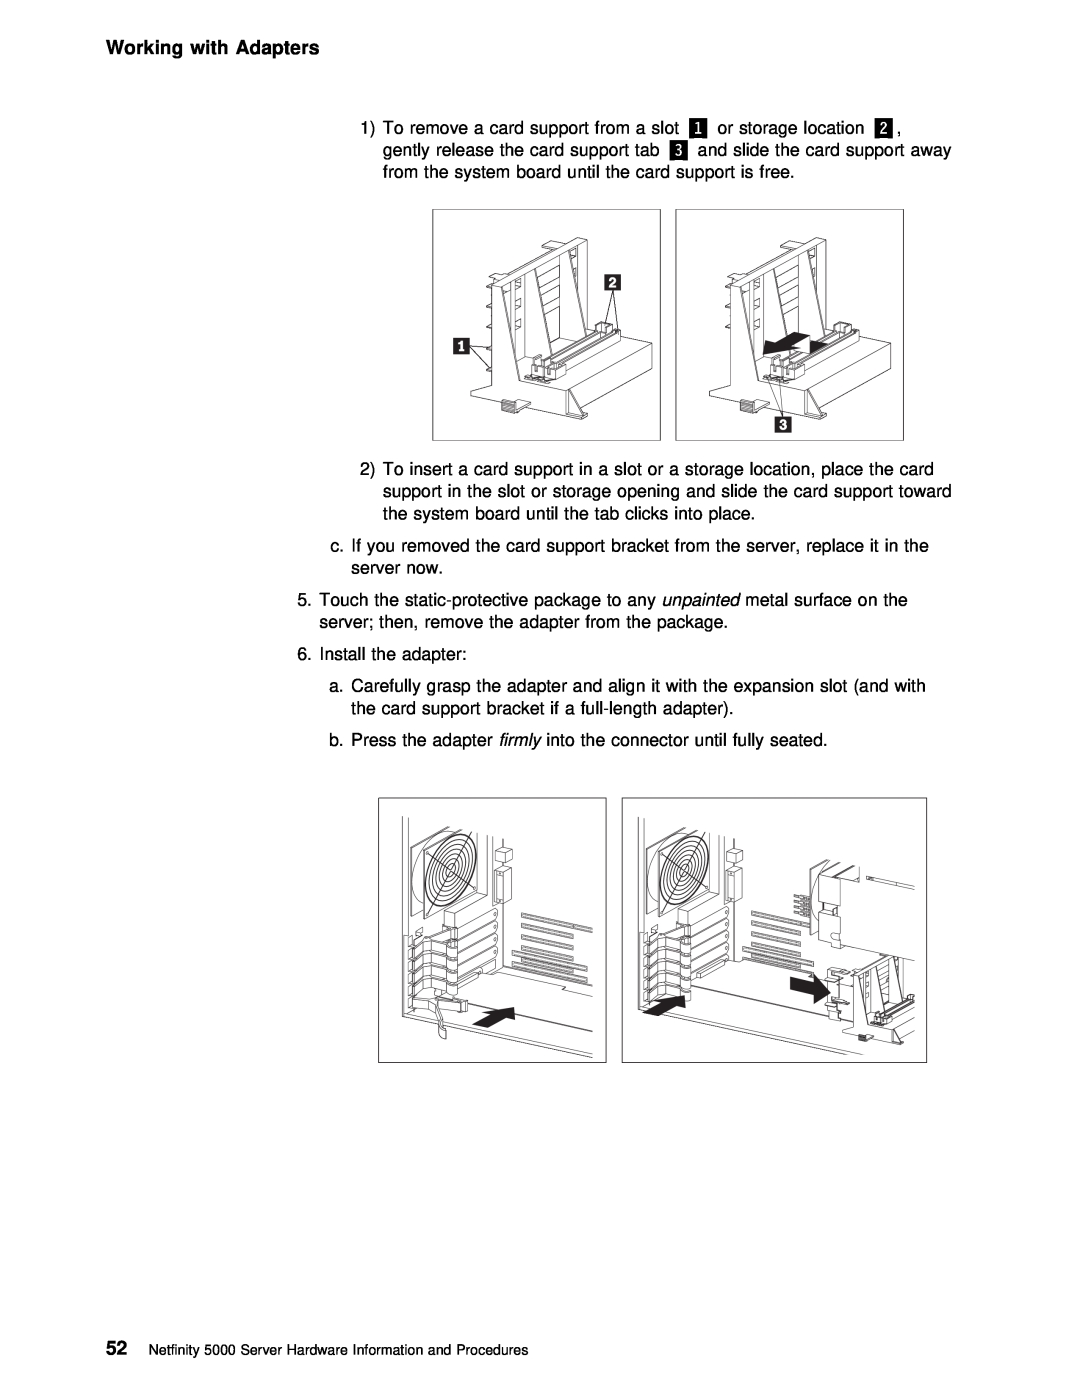 IBM manual Working with Adapters, Netfinity 5000 Server Hardware Information and Procedures 